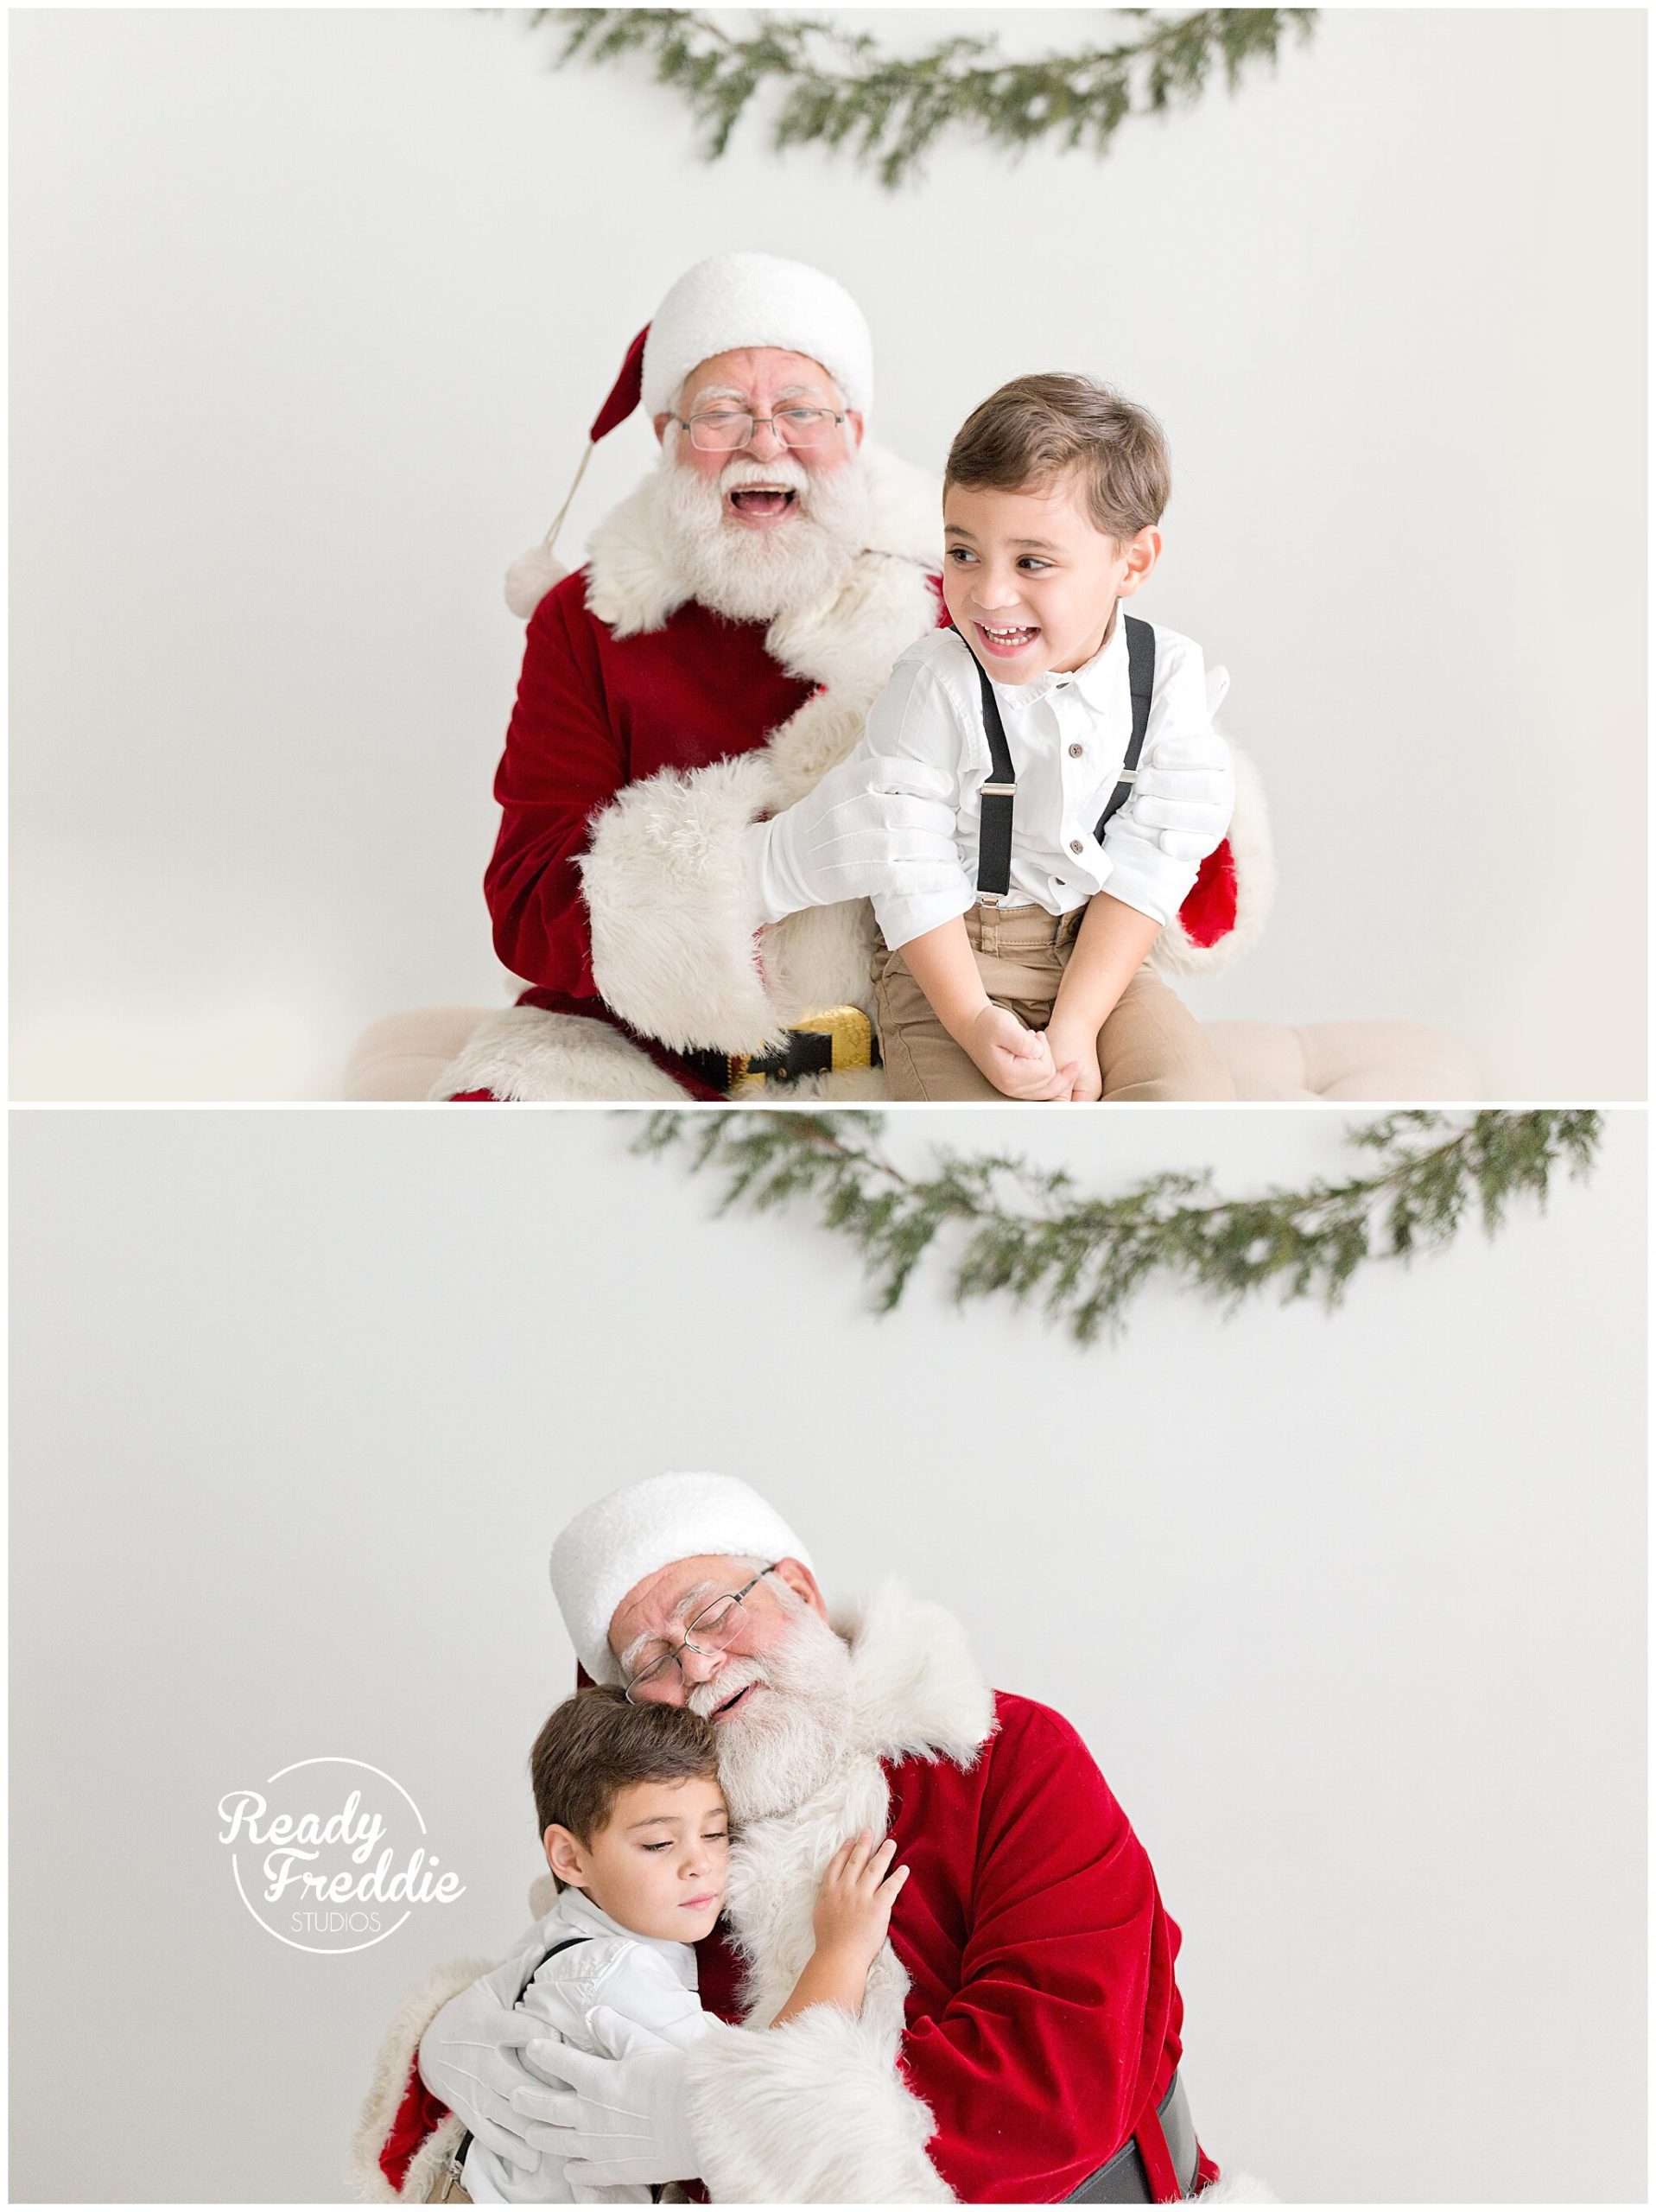 Cute pictures with Santa for the Holidays with Ivanna Vidal Photography in Miami FL